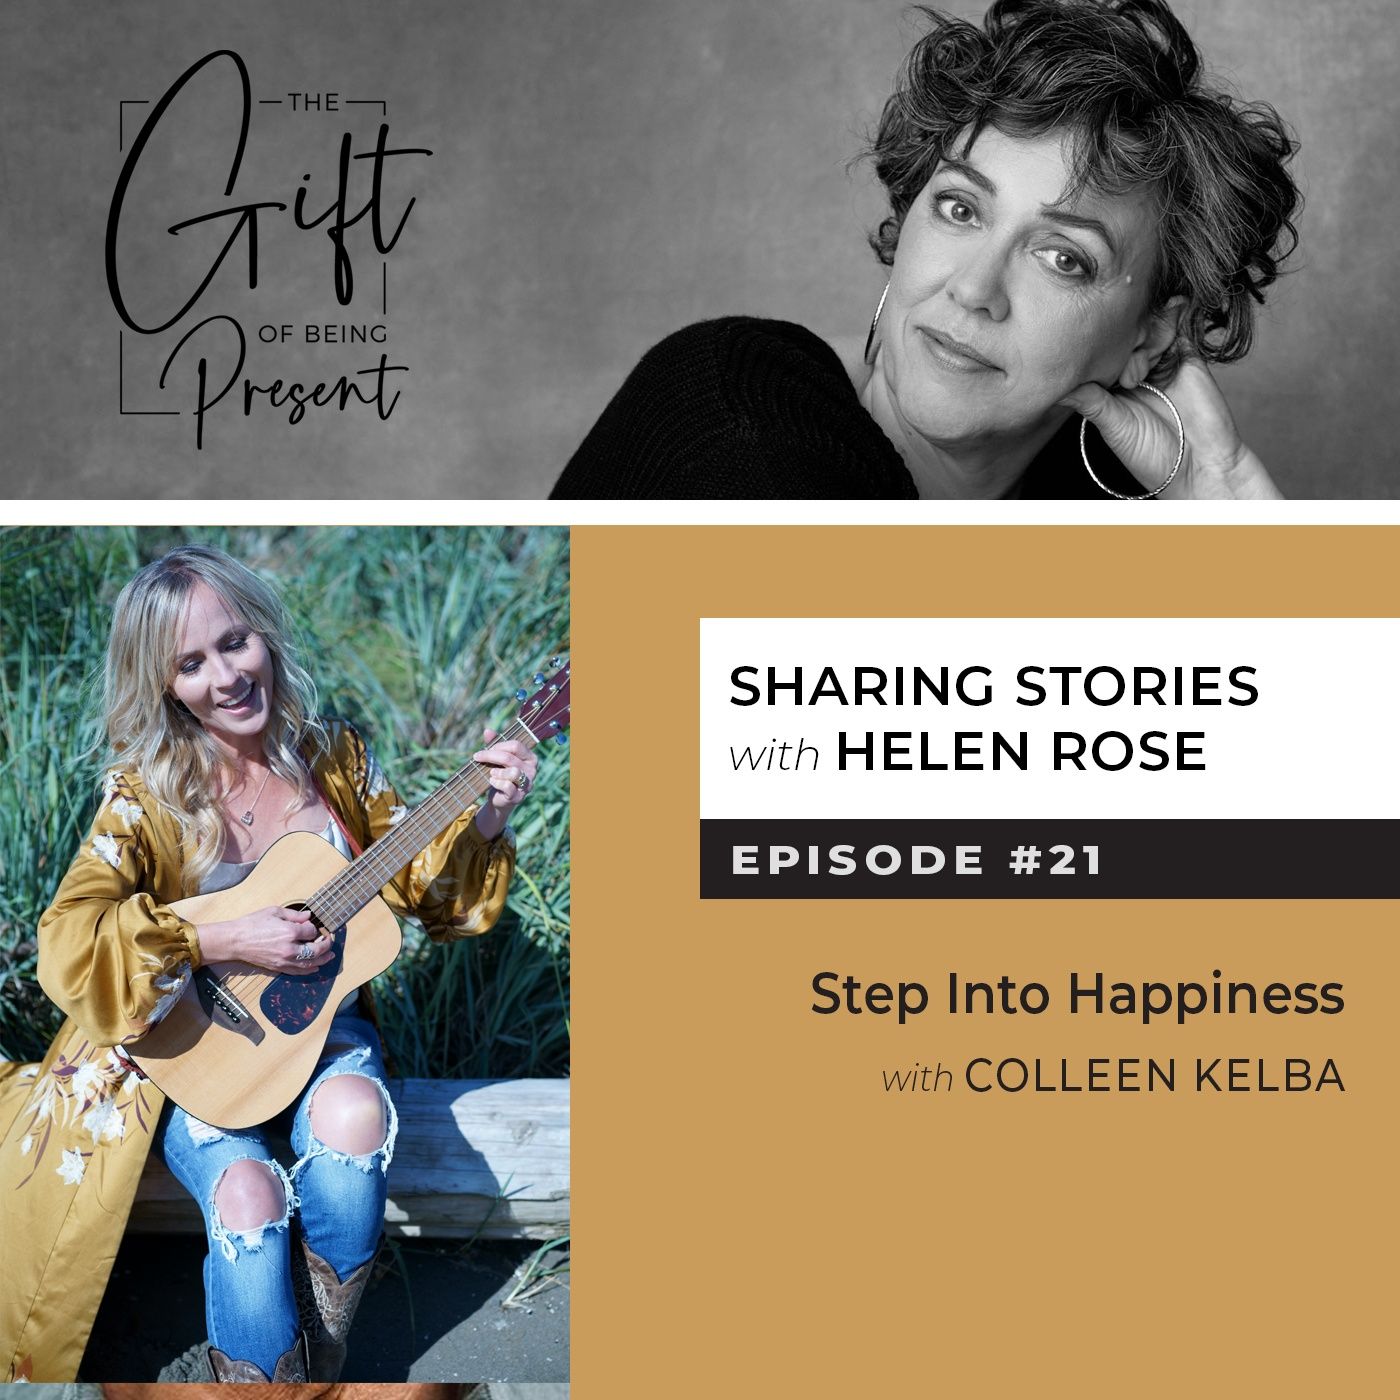 Step into Happiness with Colleen Kelba